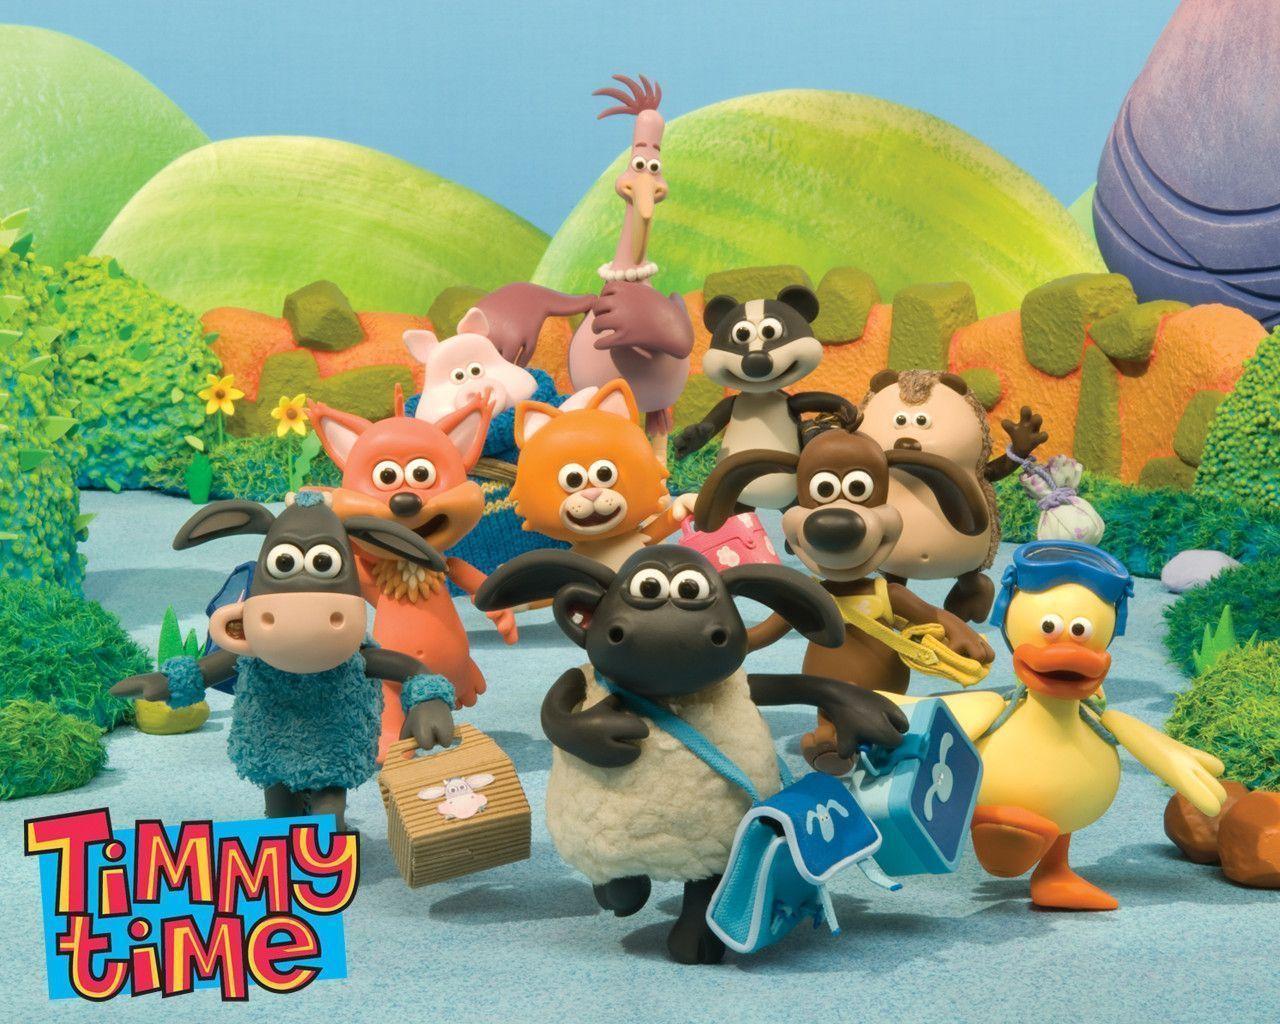 ABC4Kids to Timmy Time!